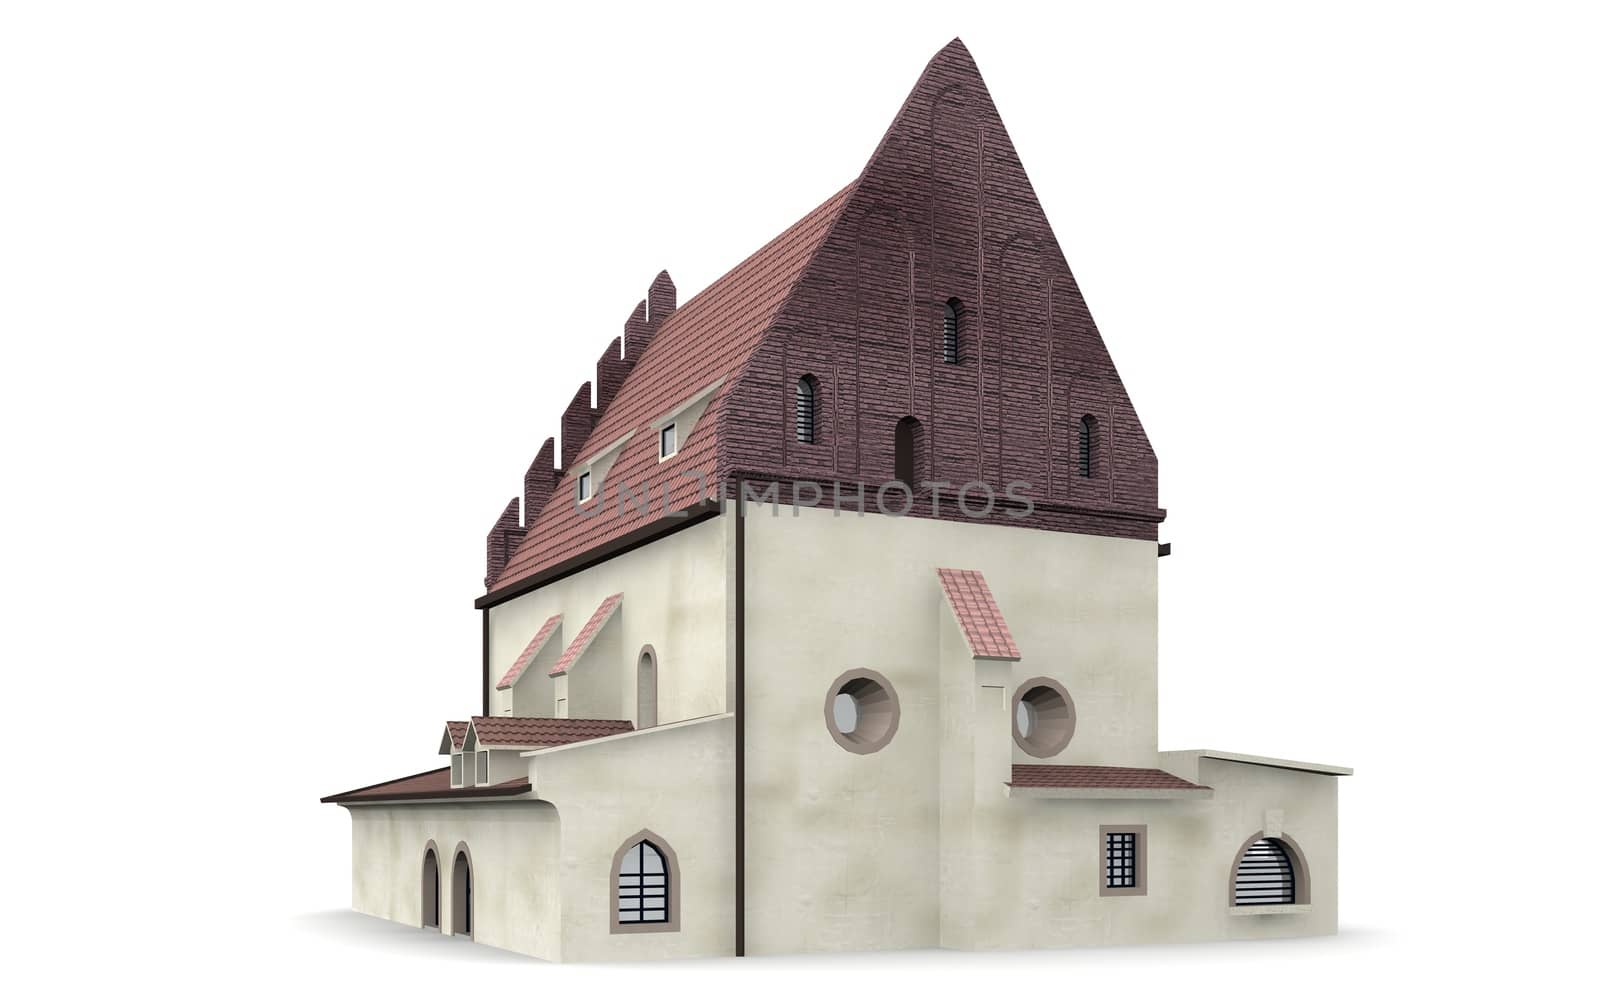 The synagogue was in the middle of the 13th Century.